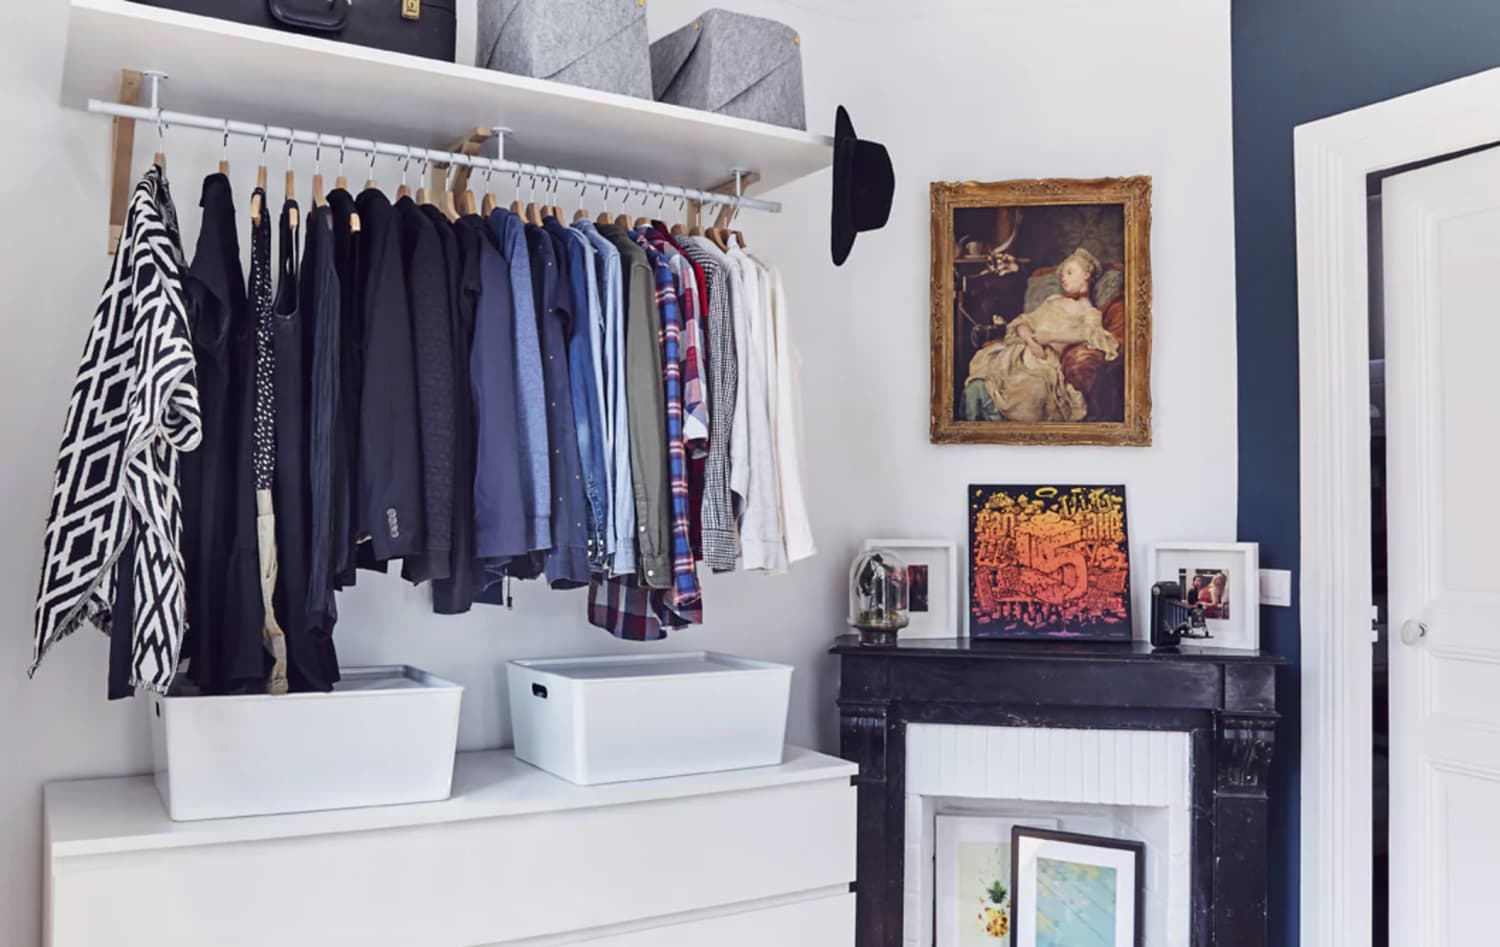 Under-$15 IKEA Finds That�ll Effortlessly Organize Your Closet